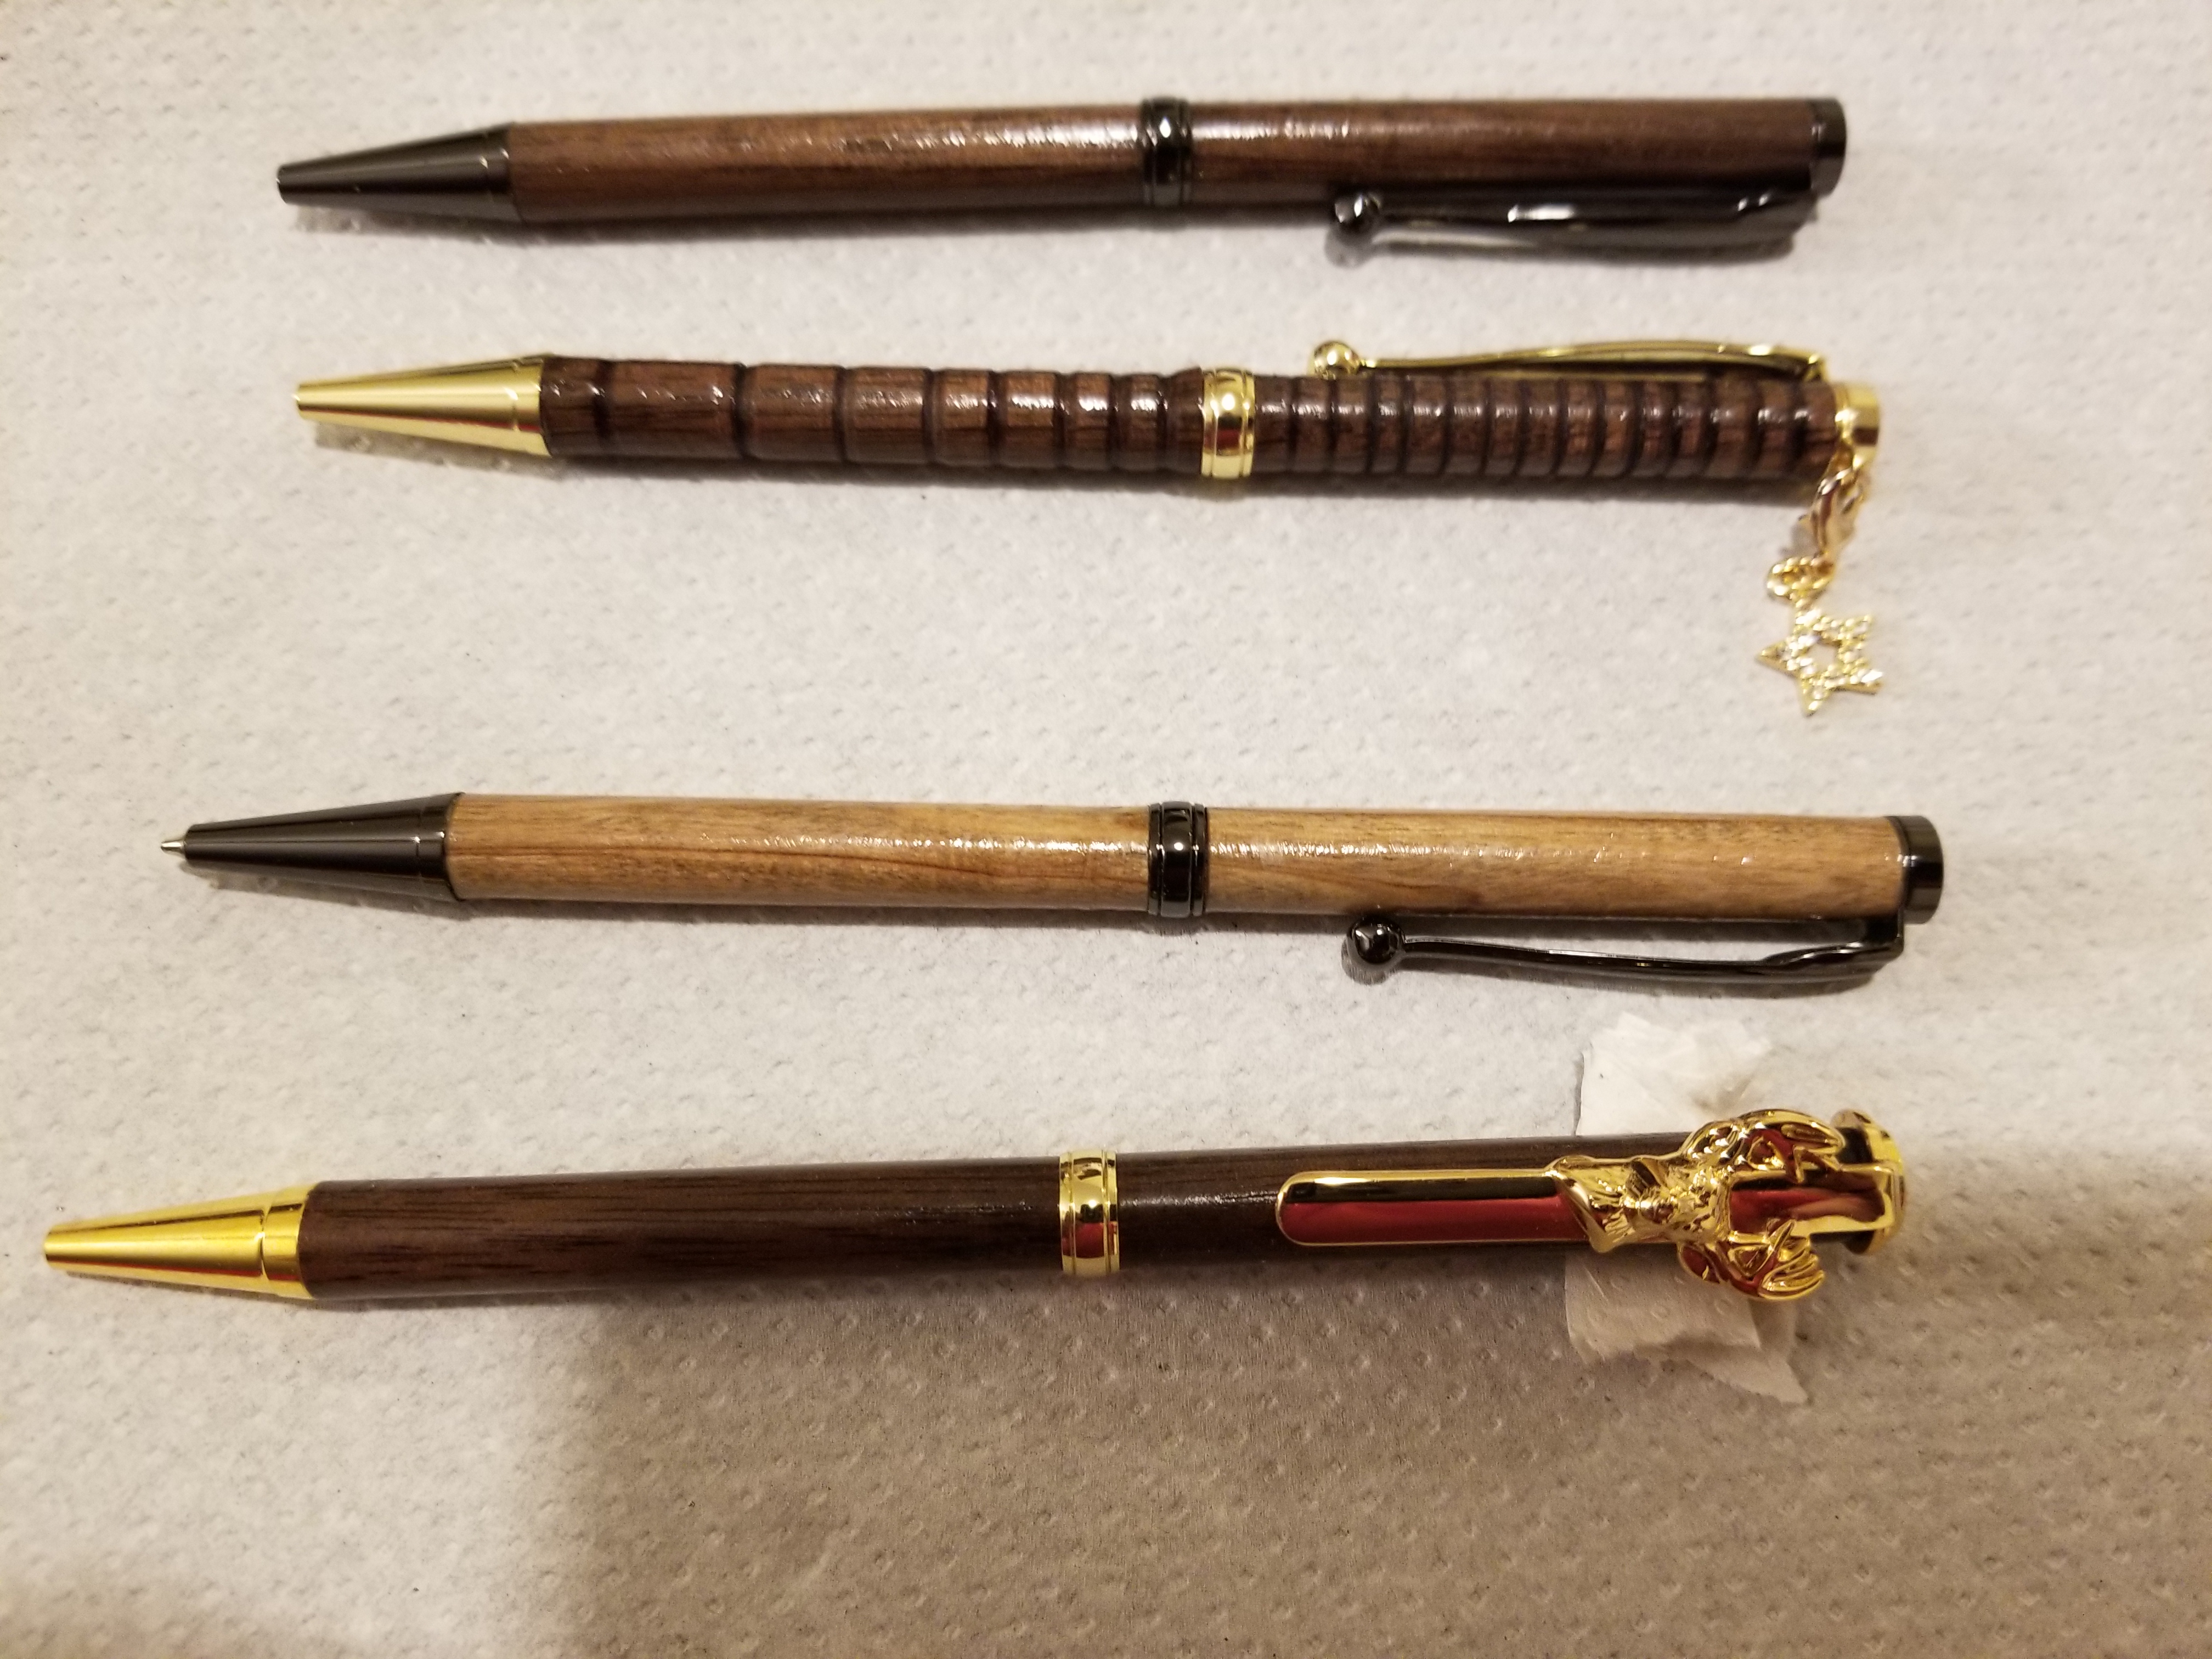 My First Pens